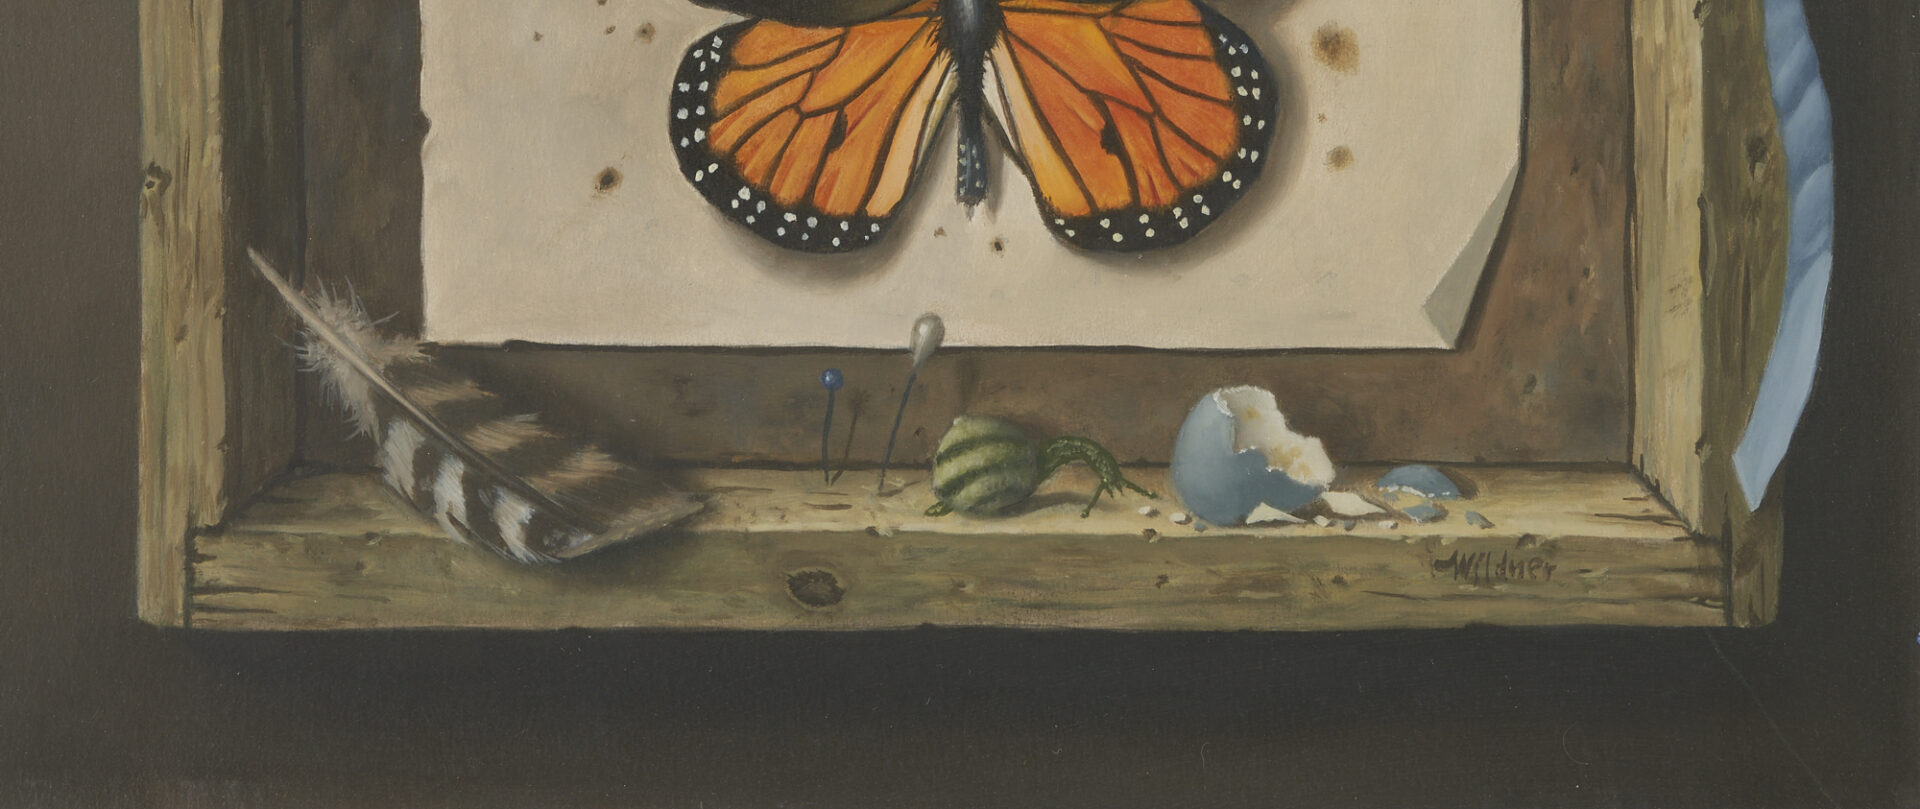 Lot 161: Werner Wildner O/B Trompe L'Oeil Painting, Monarch Butterfly